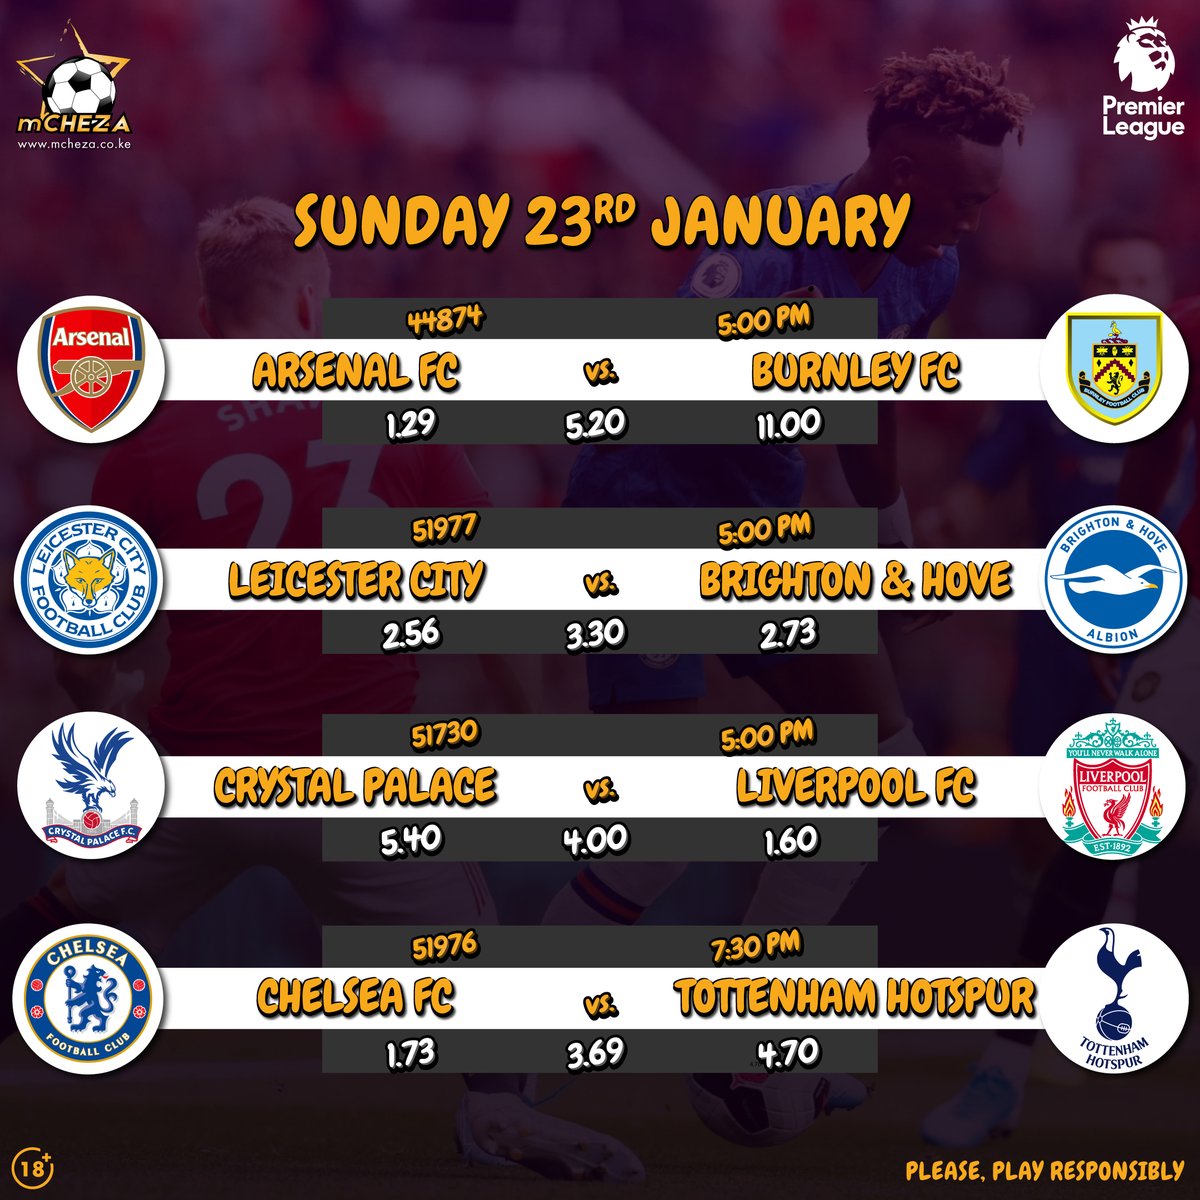 After a sensational showcase of brilliance and resilience in the English #PL, we still have more in store for you this Sunday Afternoon from 5 pm inclusive of the match banger between Chelsea and Spurs later today.

#mCHEZAKE
#PremierLeague
#PL
#ShindaNamCHEZA
#ChezaNamCHEZA https://t.co/VH6XRi1sLY